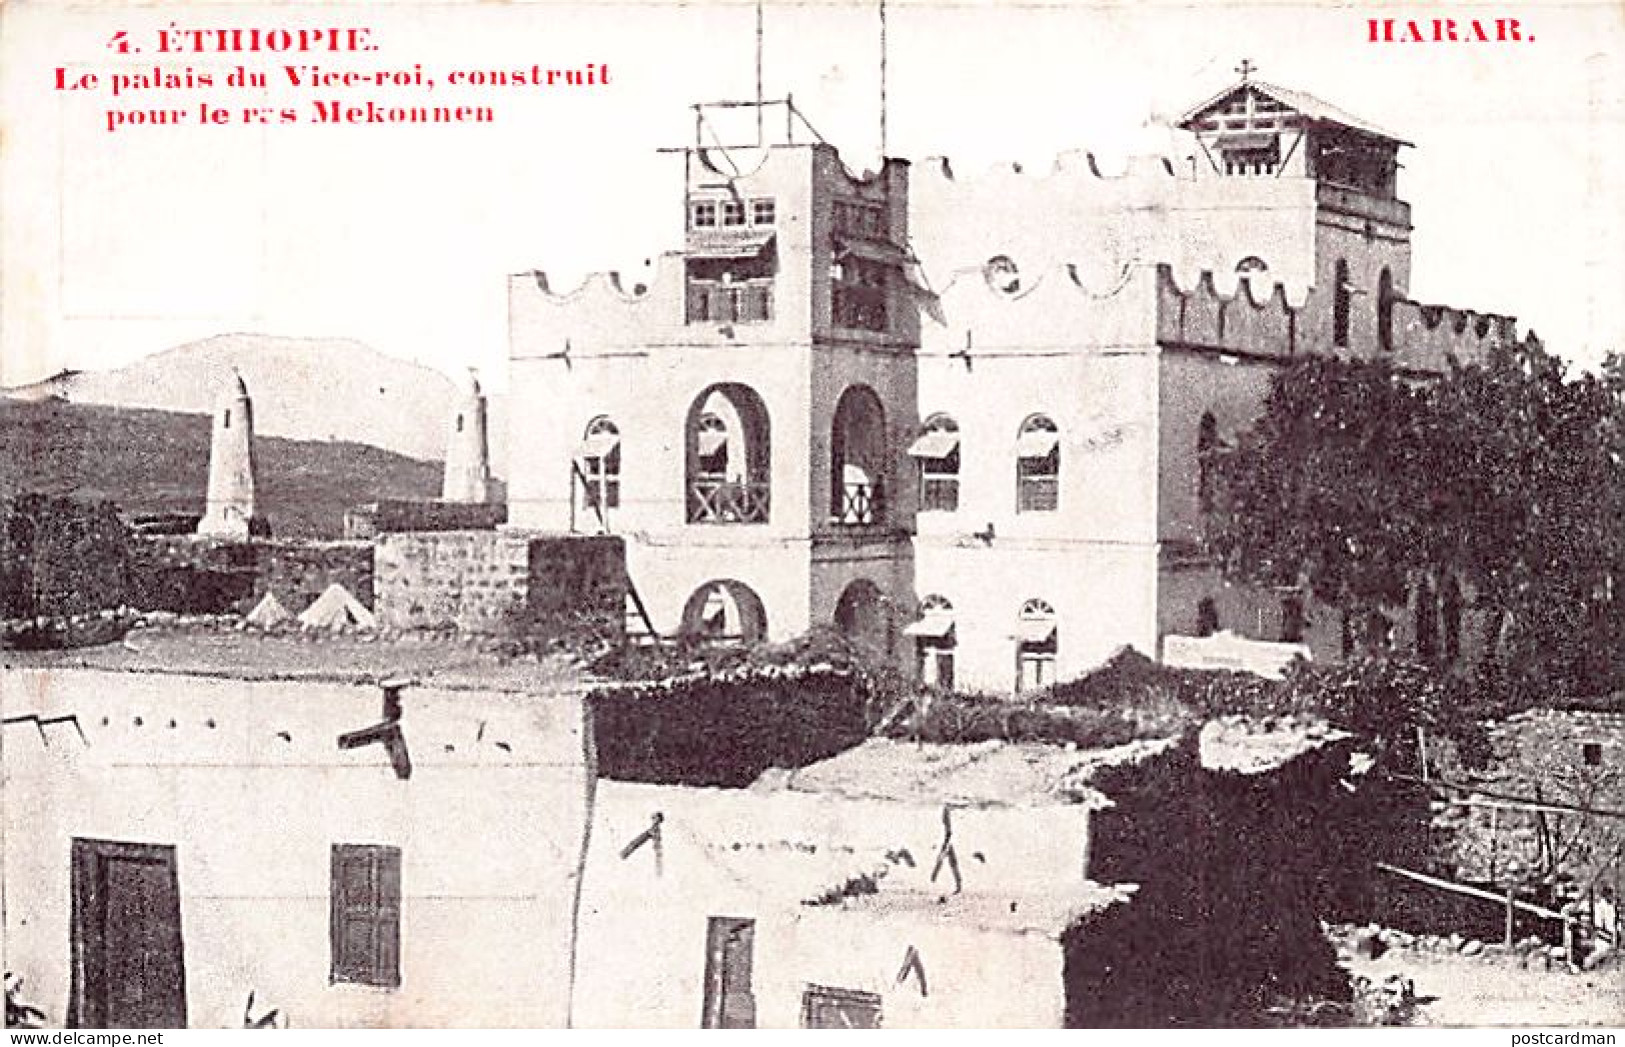 Ethiopia - HARAR - The Viceroy's Palace - Publ. St. Lazarus Printing House, Dire - Ethiopie